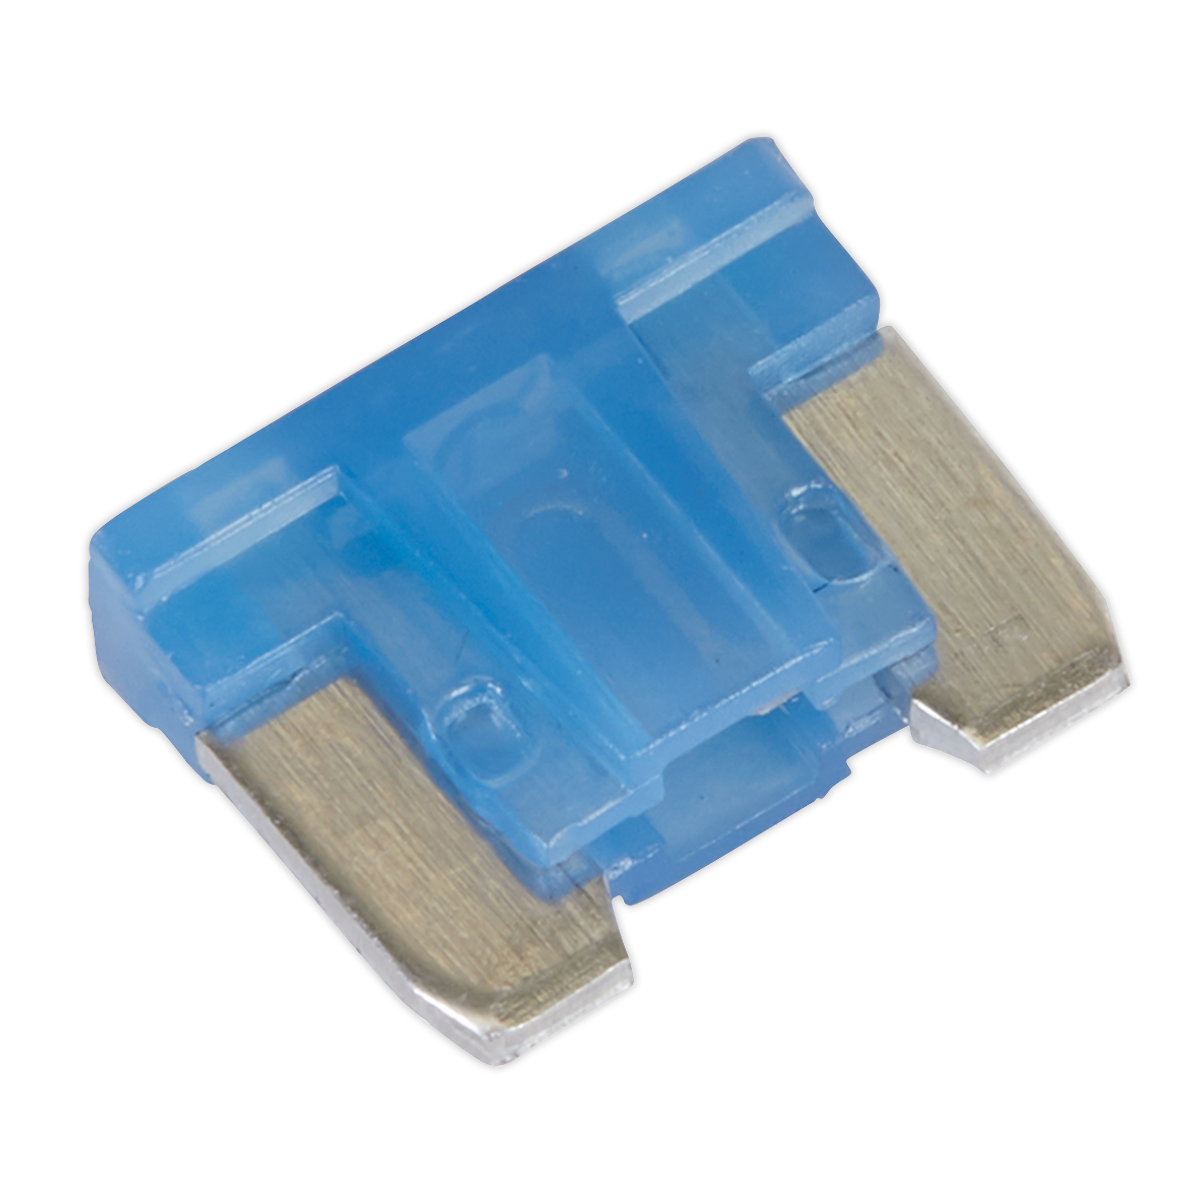 Automotive MICRO Blade Fuse 15A - Pack of 50 - MIBF15 - Farming Parts